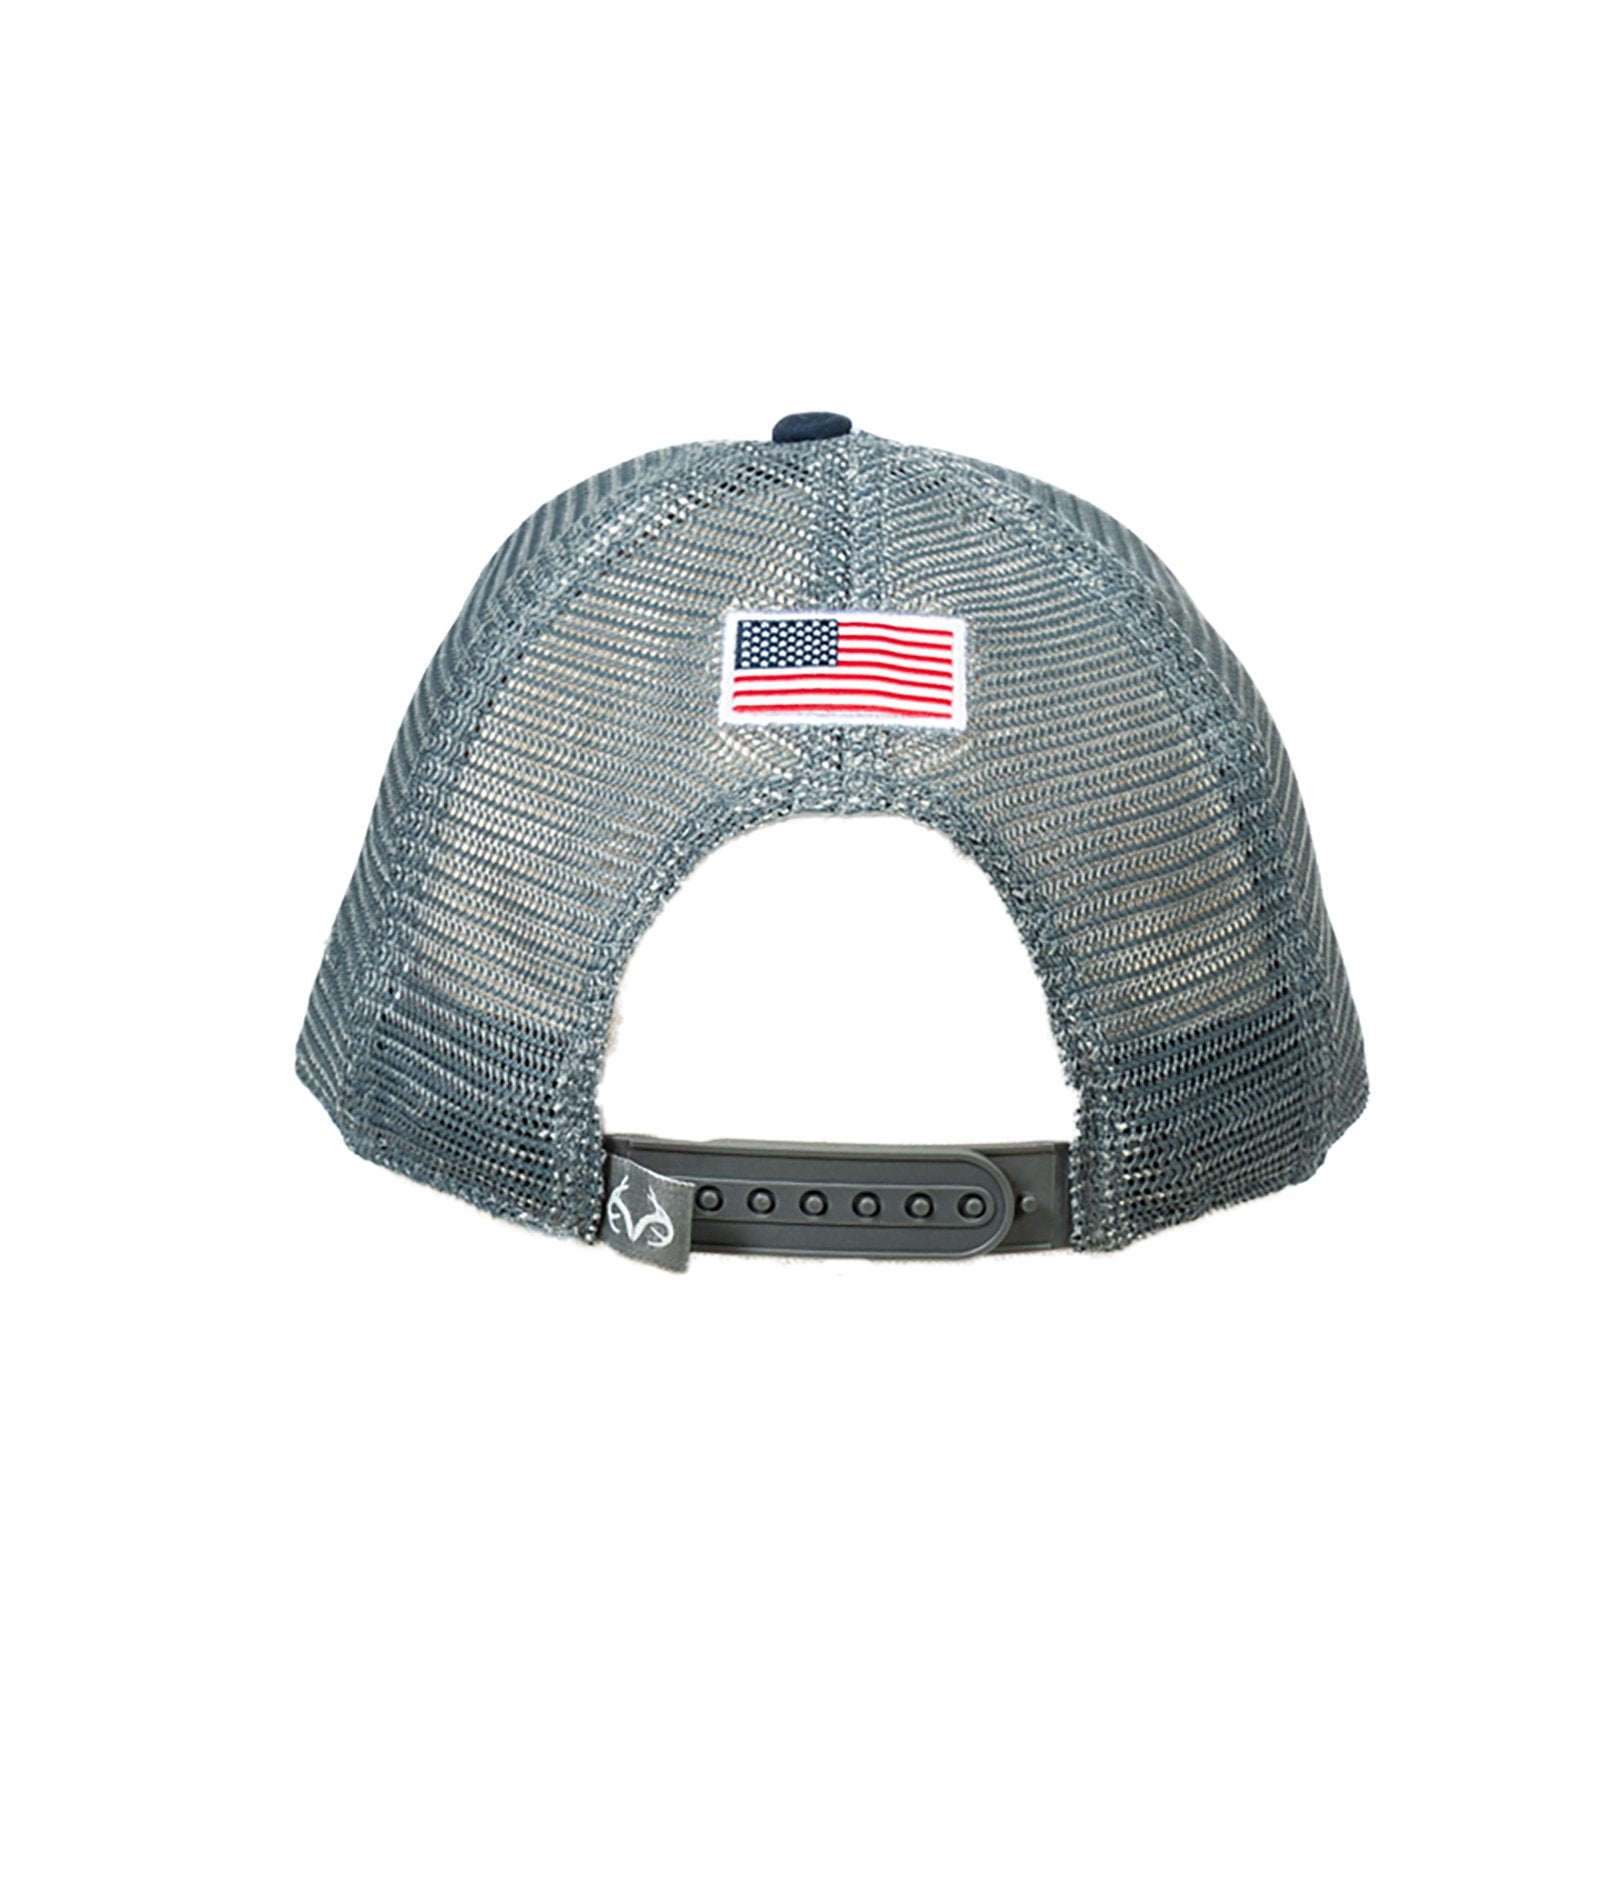 Realtree Eagle Claw Trucker Adjustable Hat